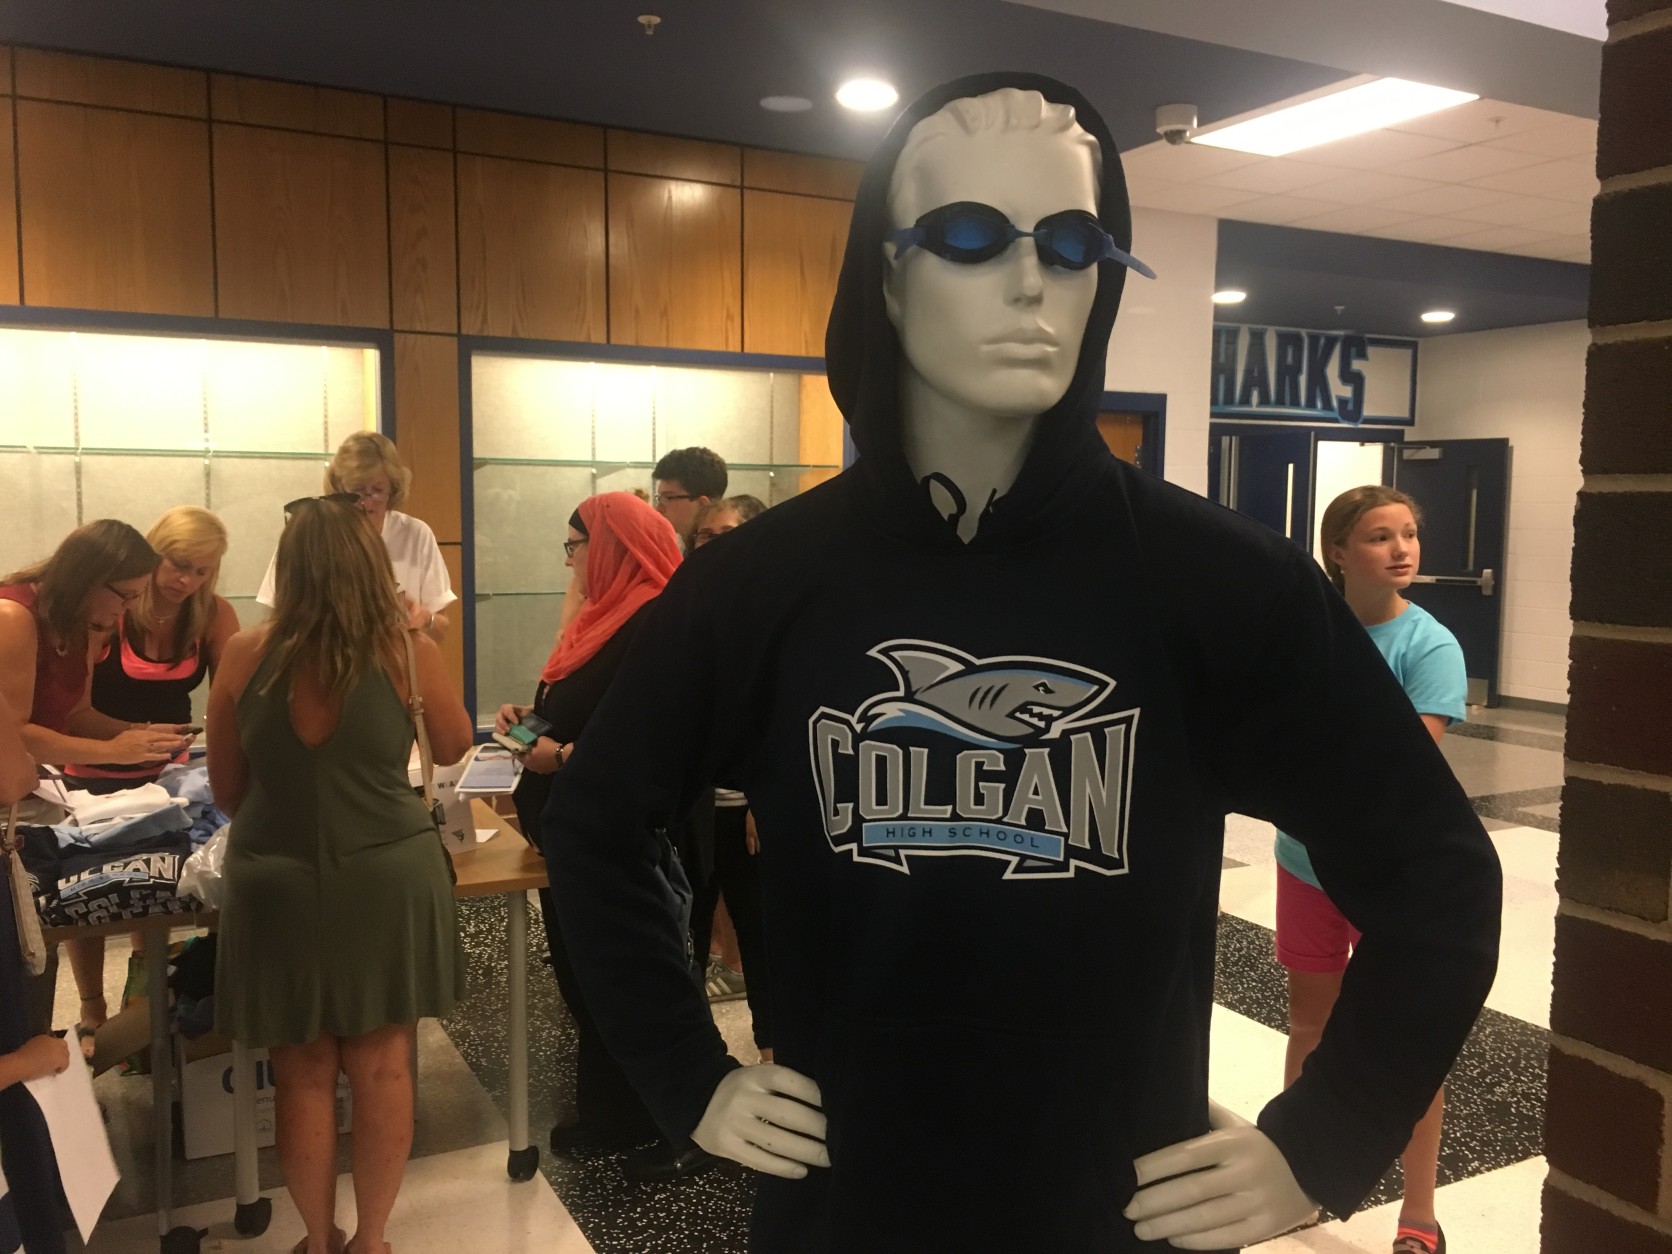 Students purchased sweaters and T-shirts featuring the schools logo and mascot, the shark. (Courtesy Colgan High School)